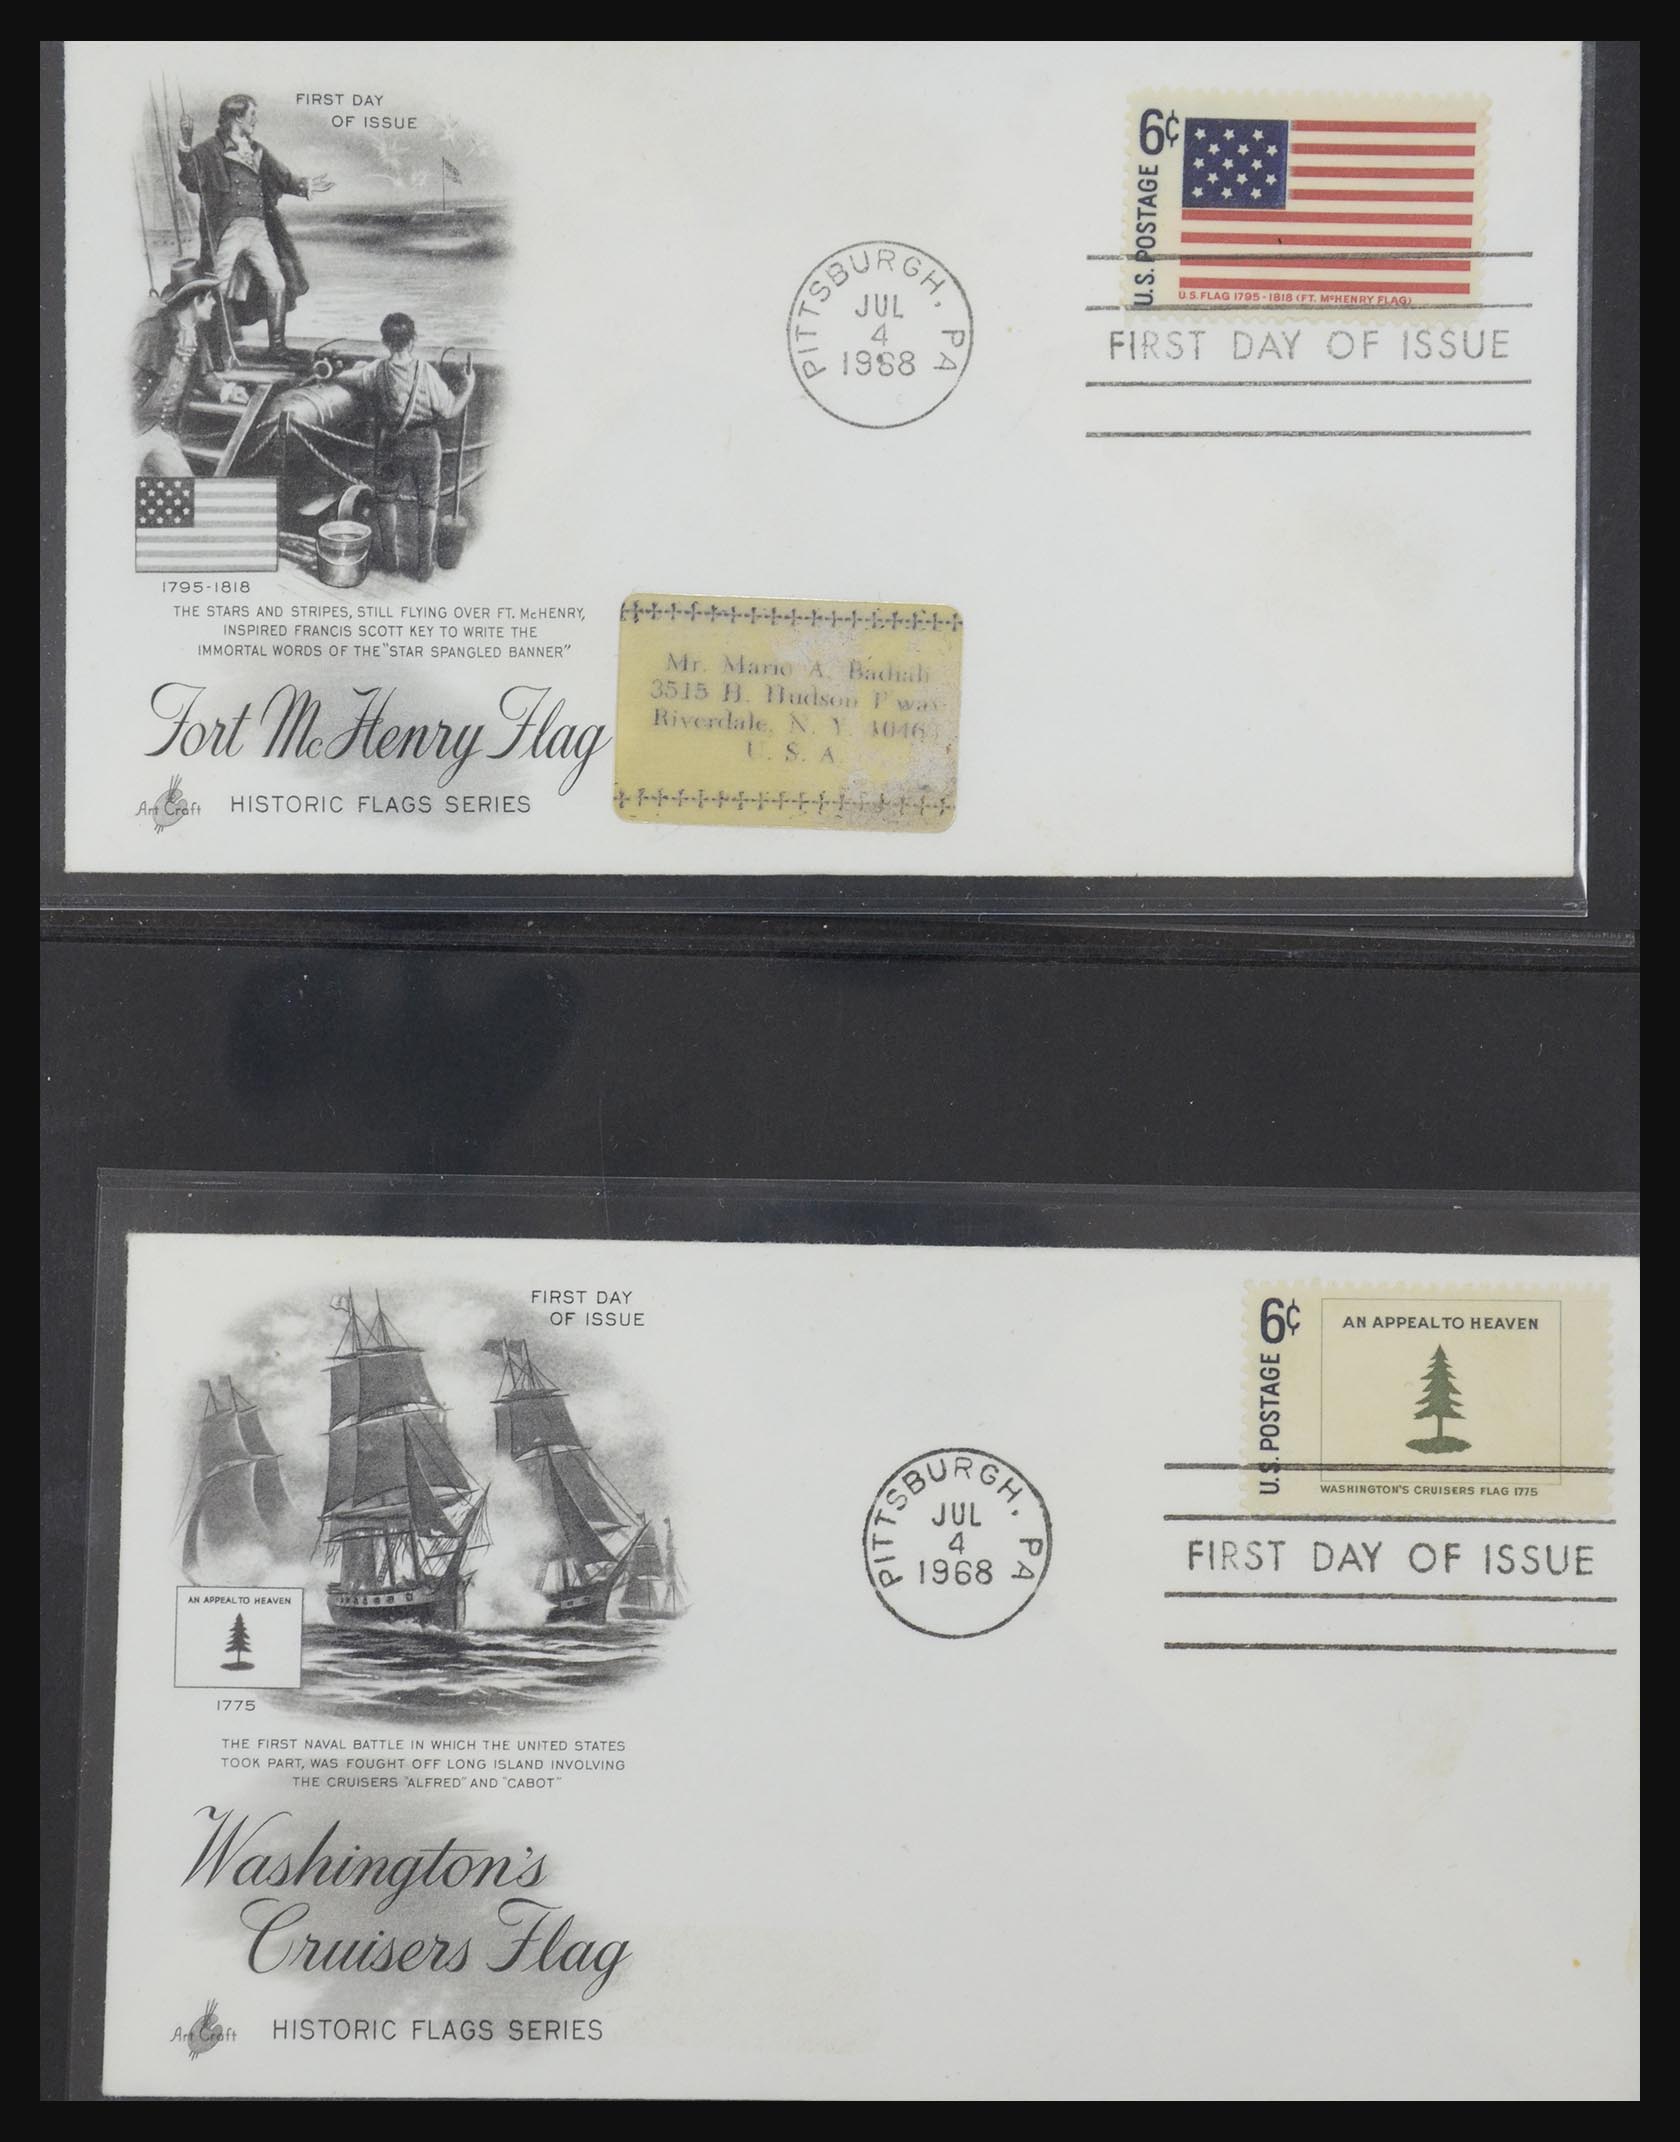 31913 0054 - 31913 USA first day cover collection 1945-1990.